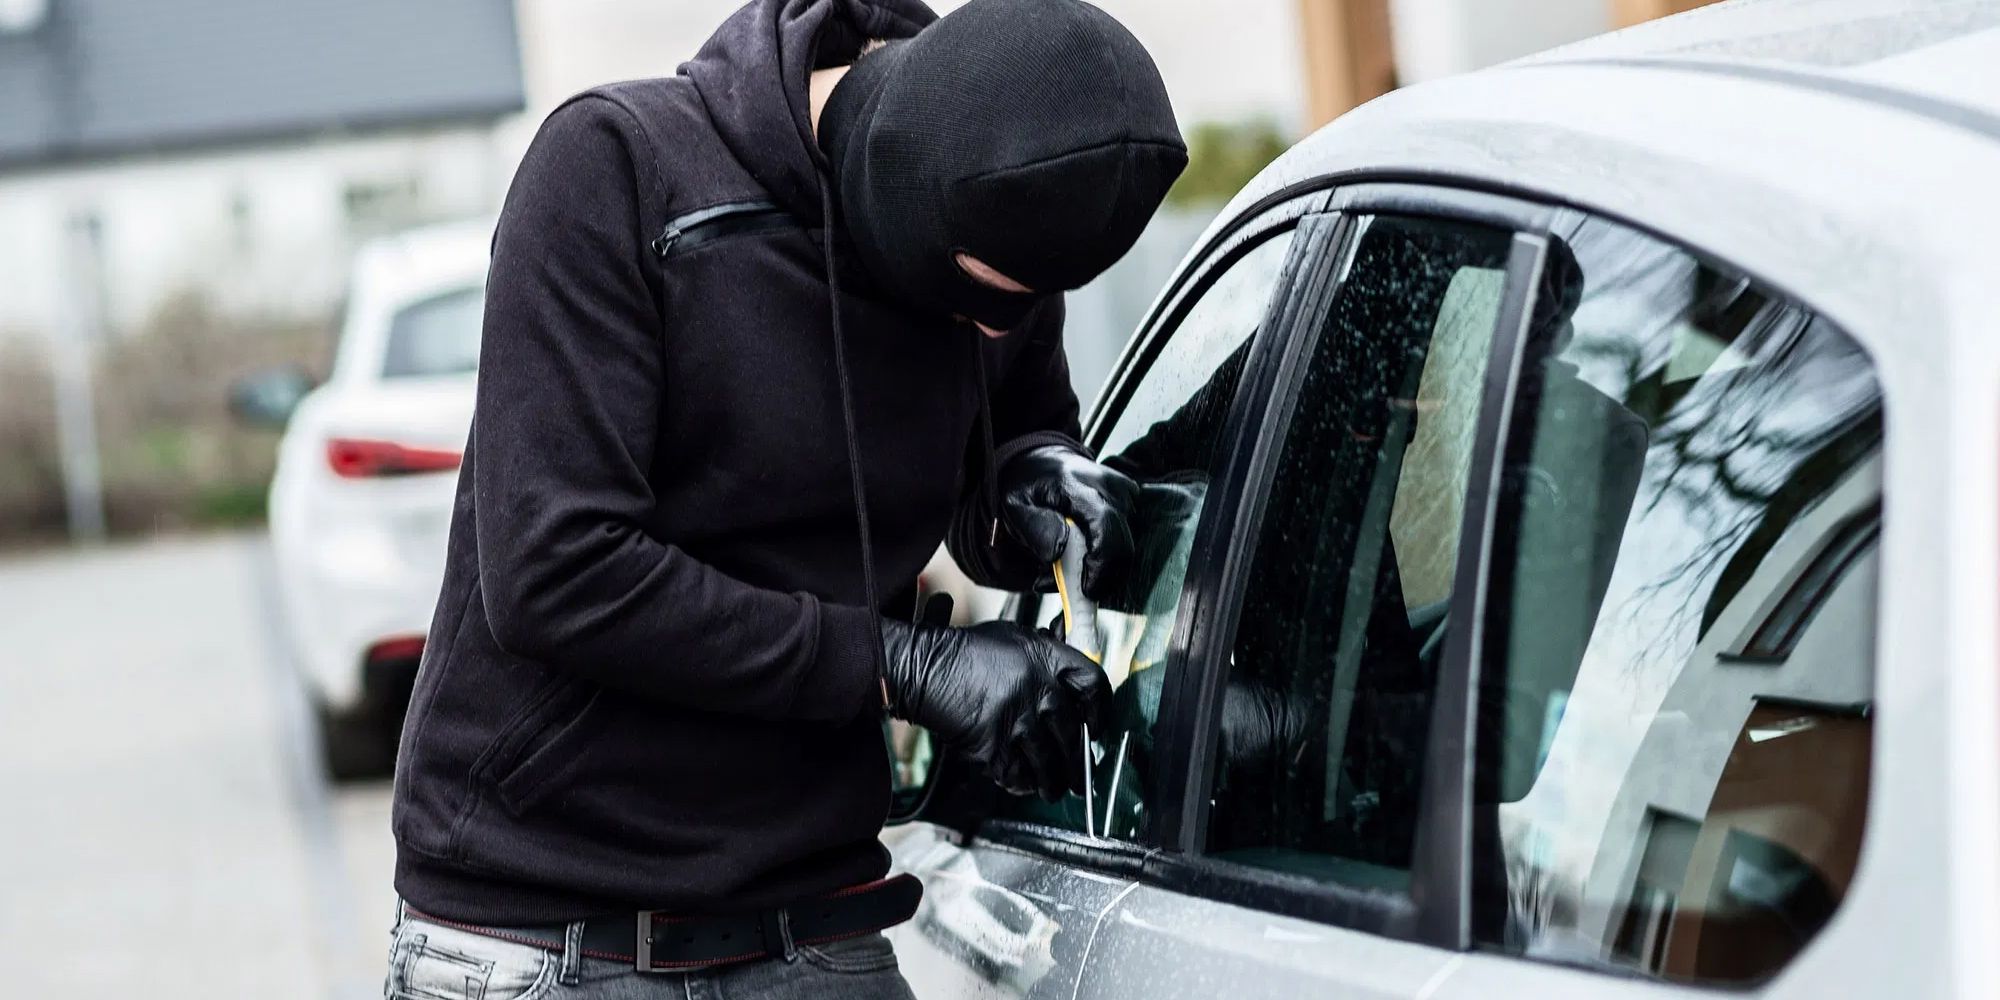 A thief attempting to break into a car